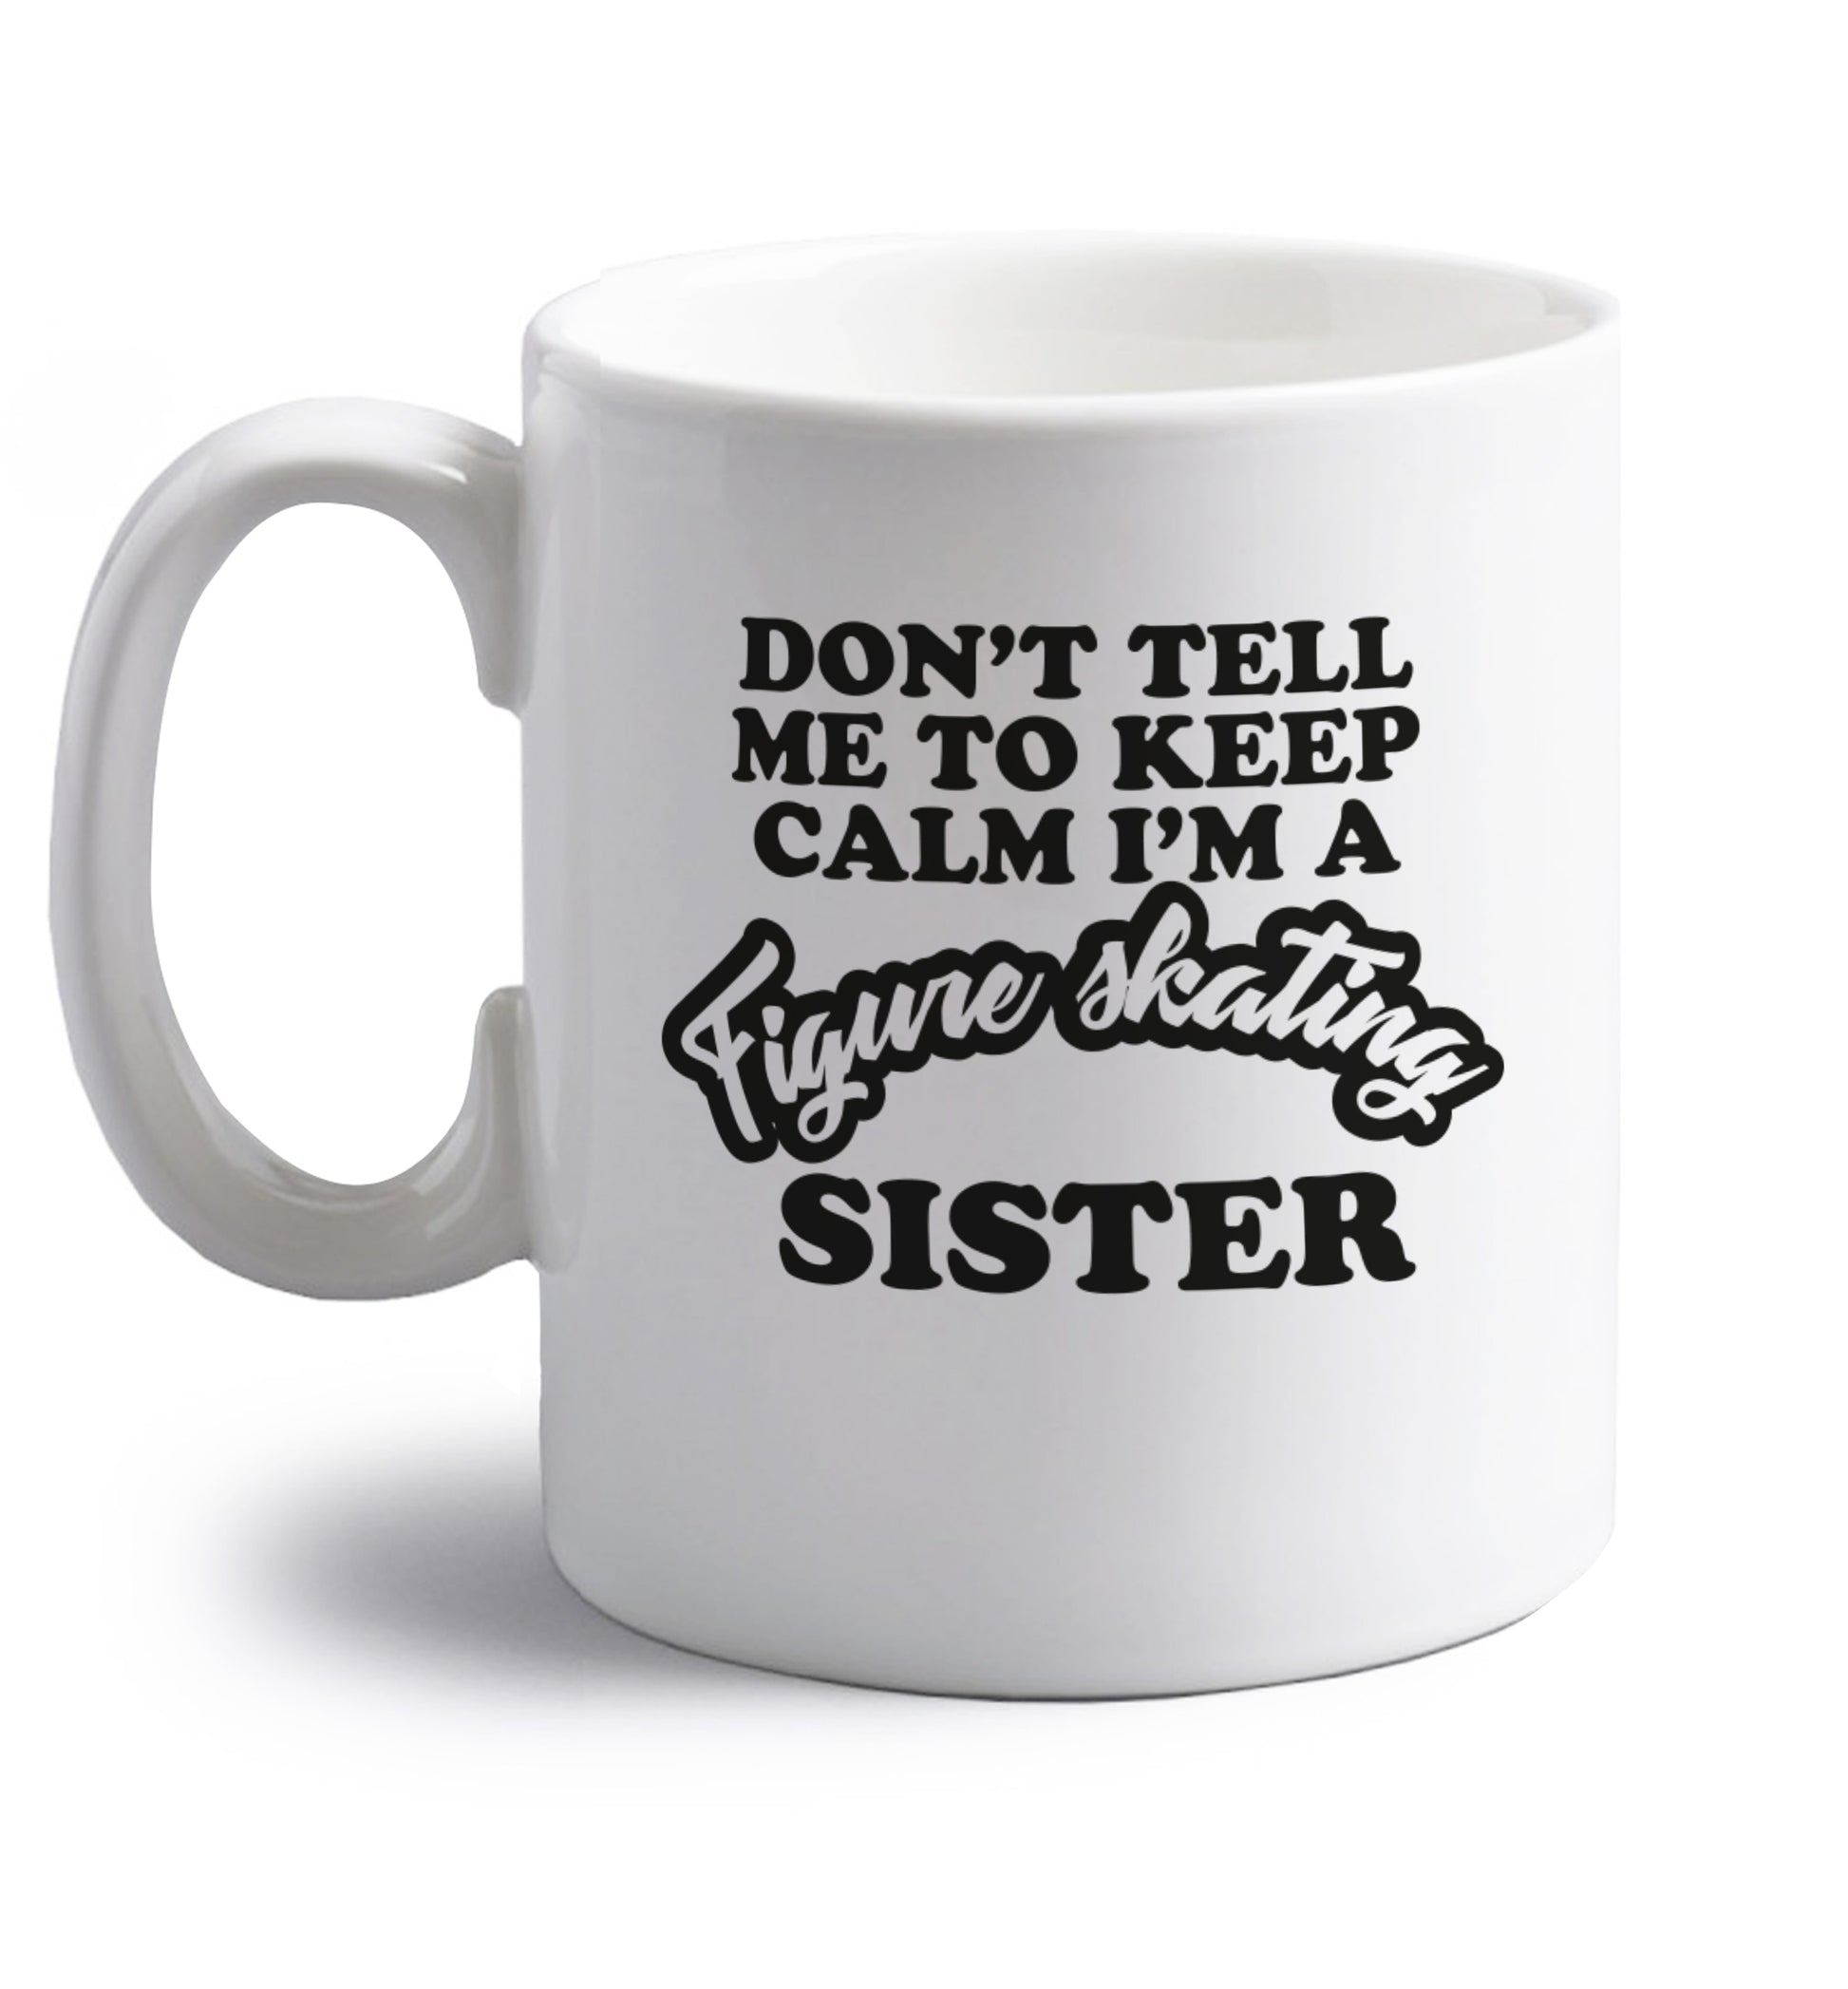 Don't tell me to keep calm I'm a figure skating sister right handed white ceramic mug 